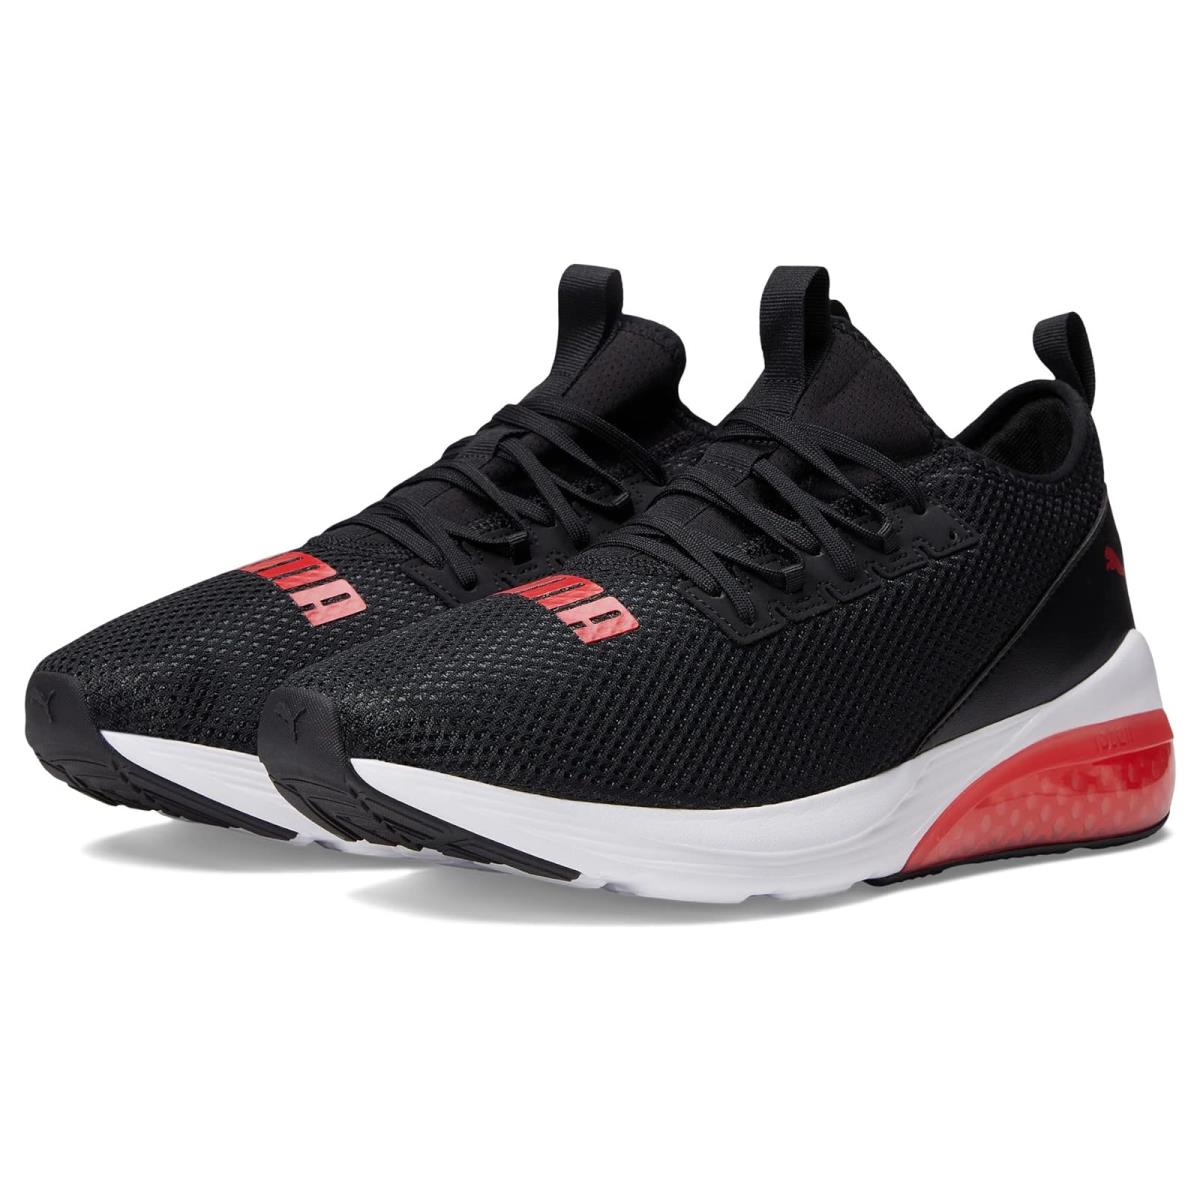 Man`s Sneakers Athletic Shoes Puma Cell Vive Bright Puma Black/High-Risk Red/Puma White